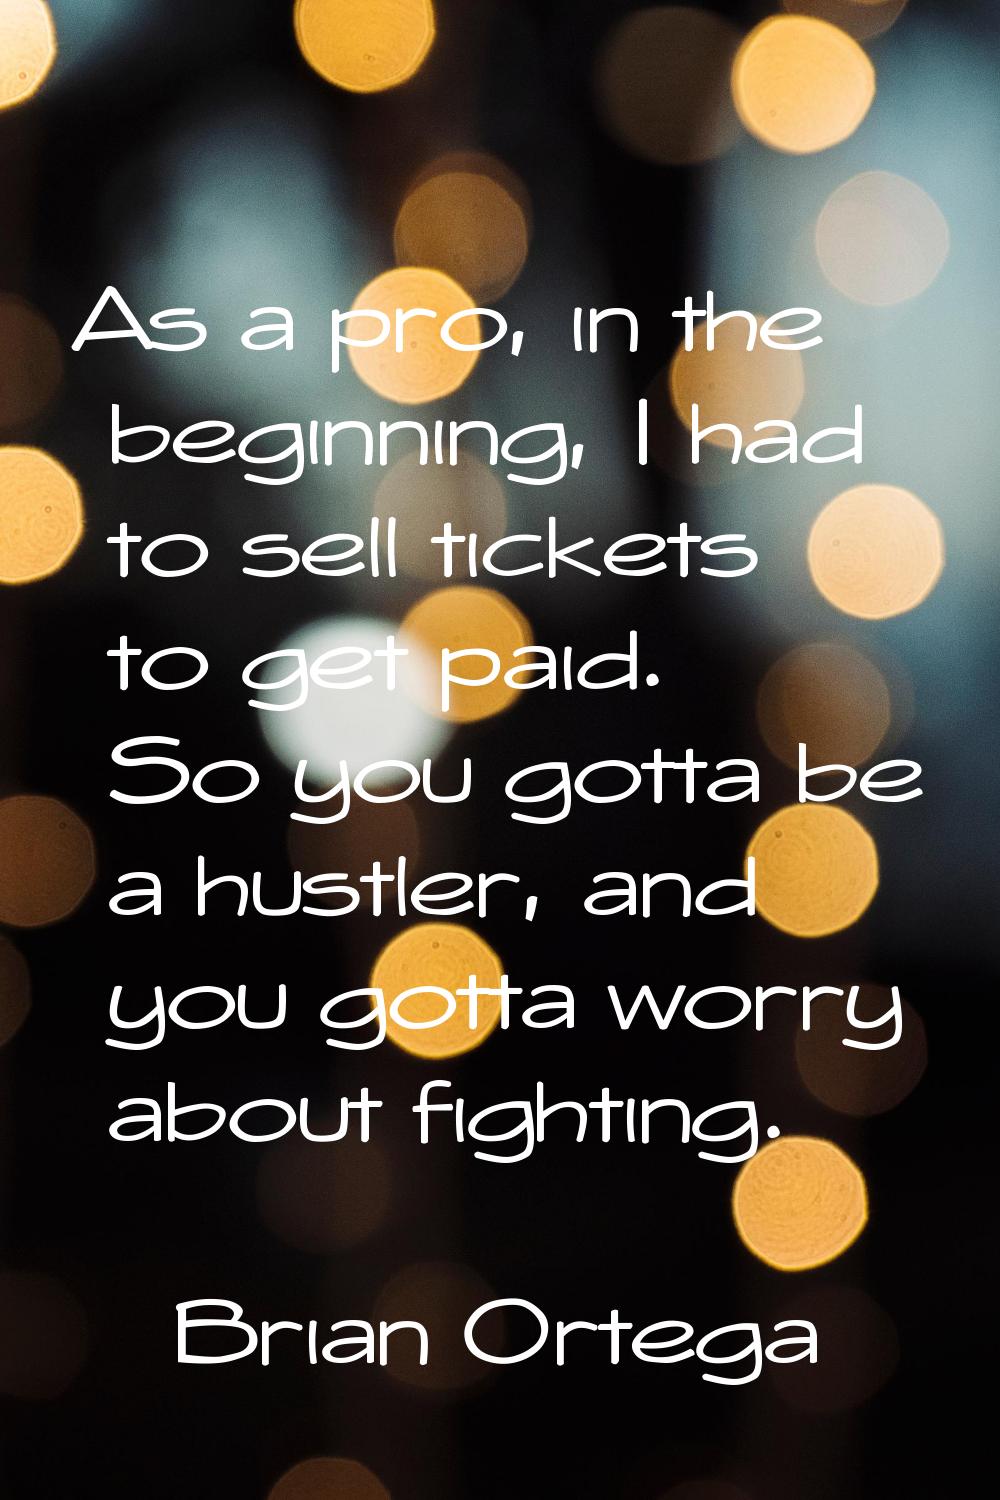 As a pro, in the beginning, I had to sell tickets to get paid. So you gotta be a hustler, and you g